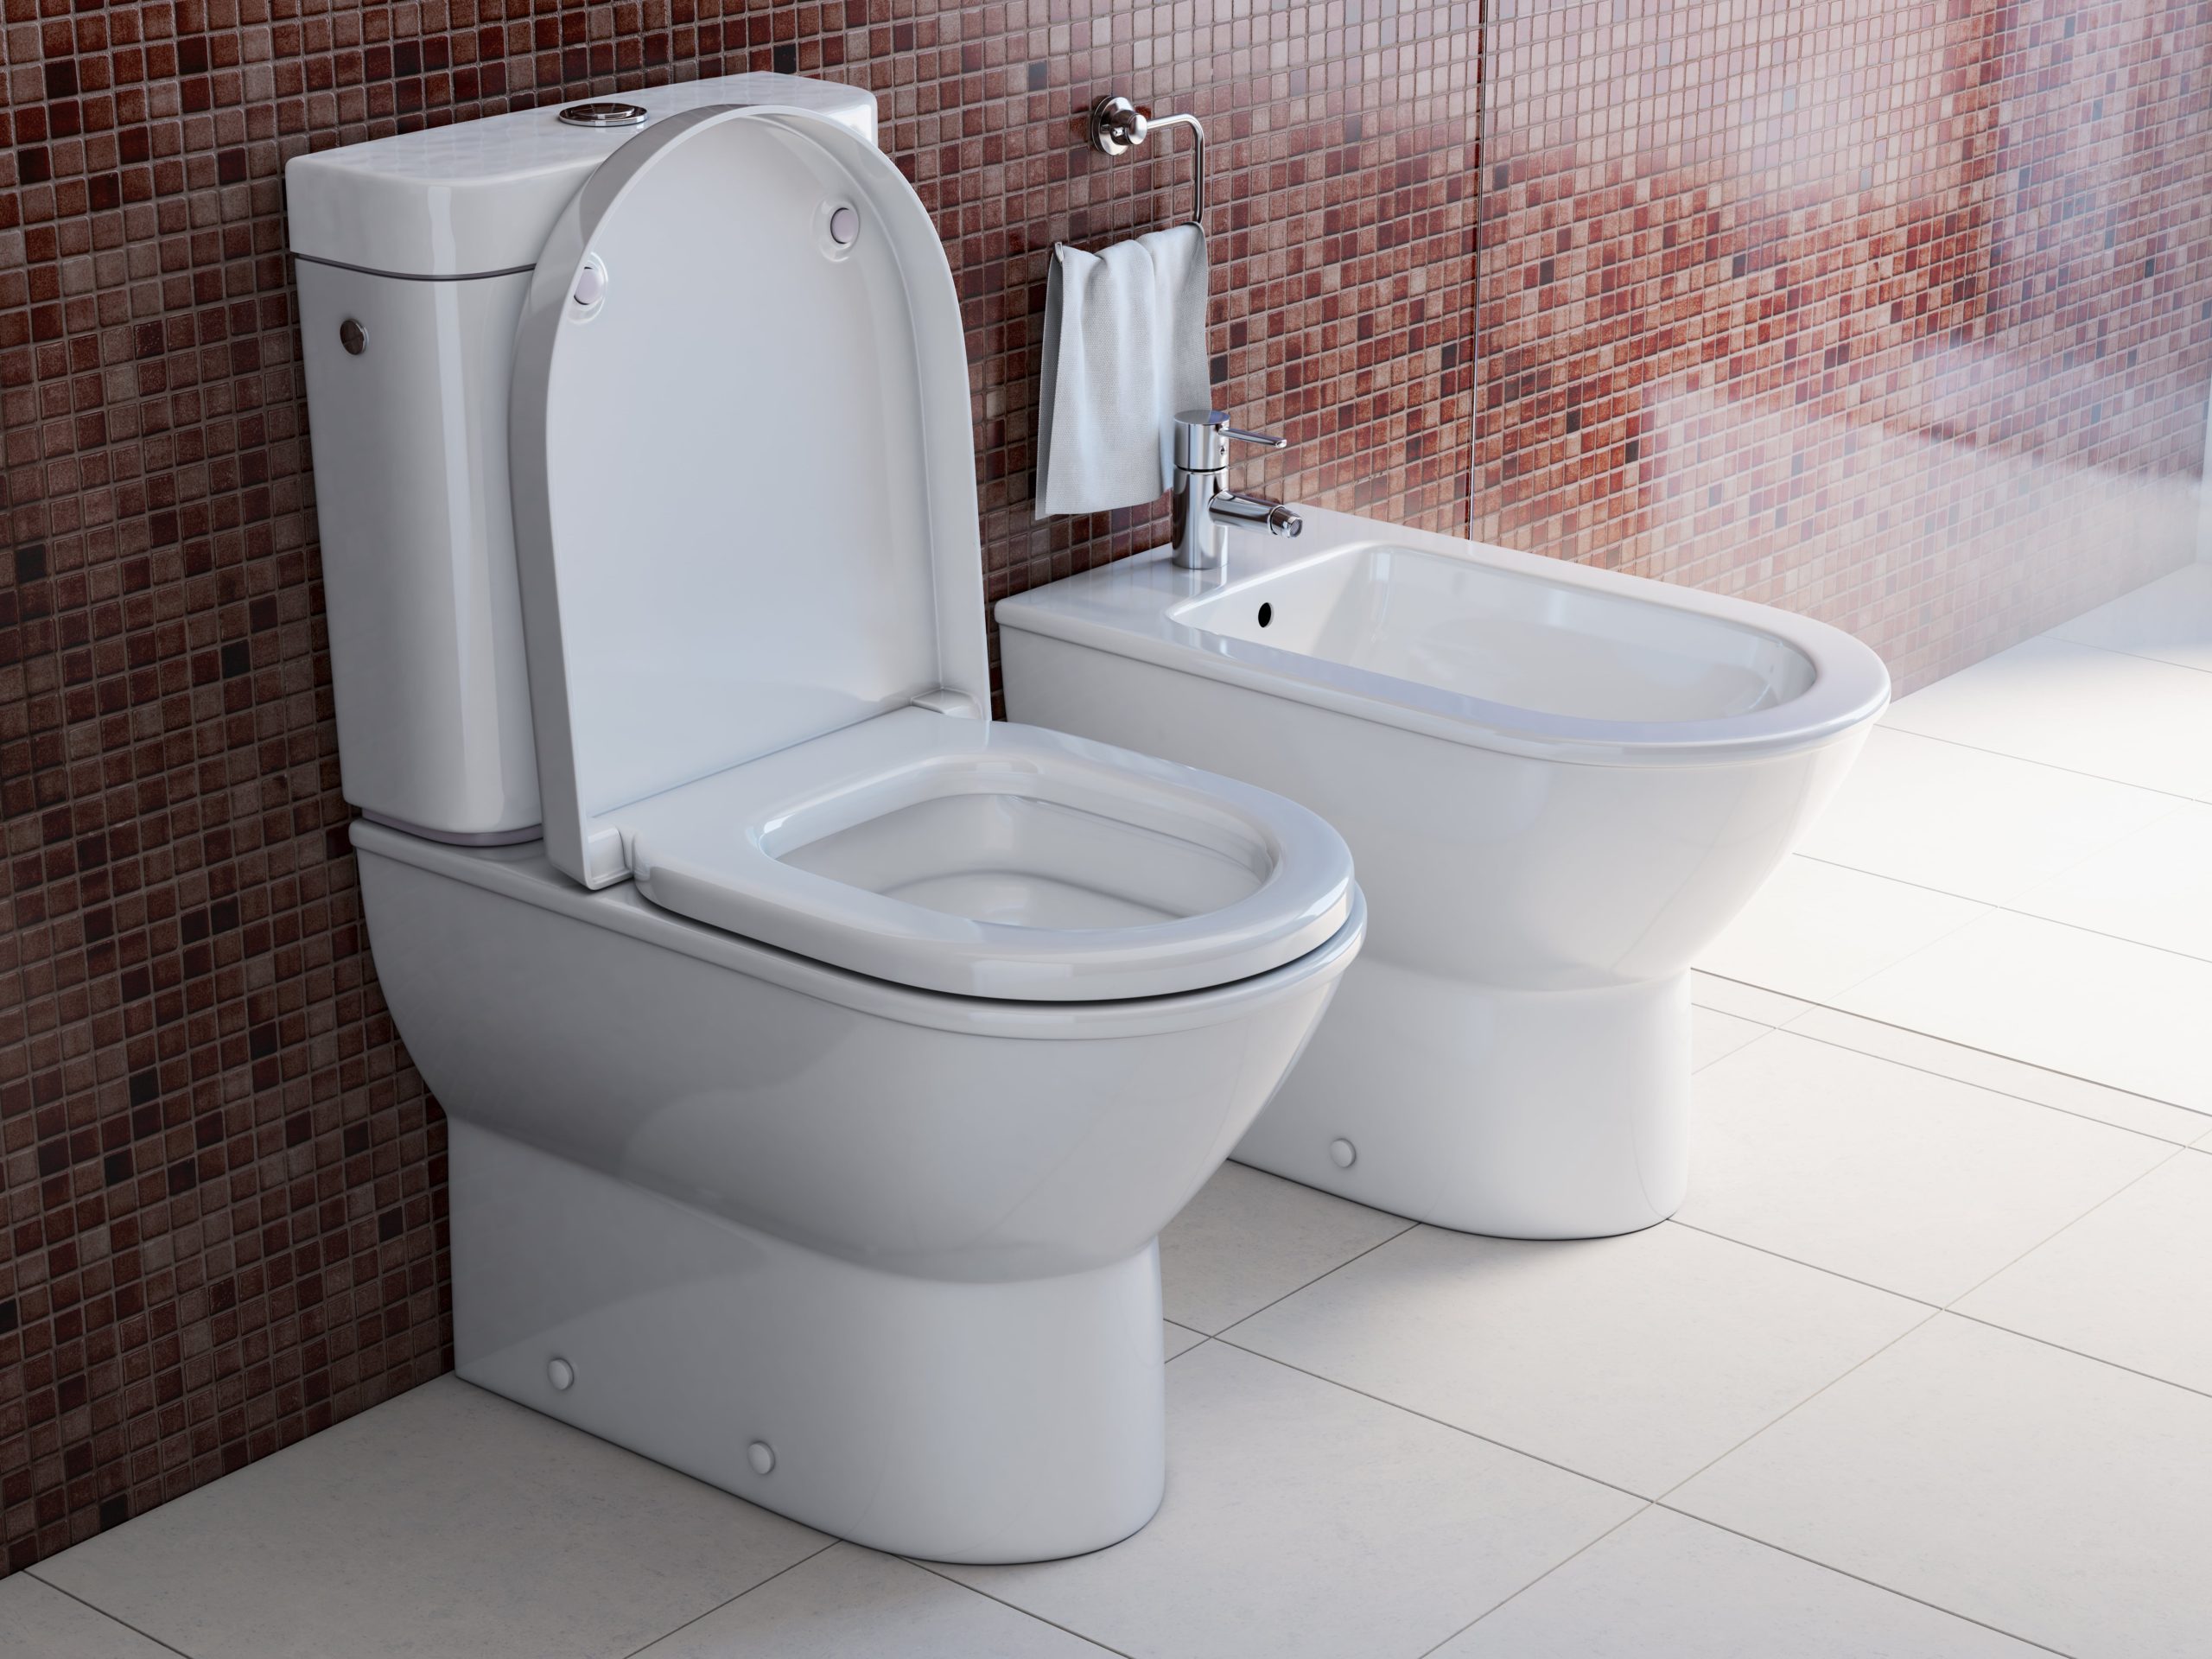 Pros and Cons of Installing a Bidet in Your Bathroom